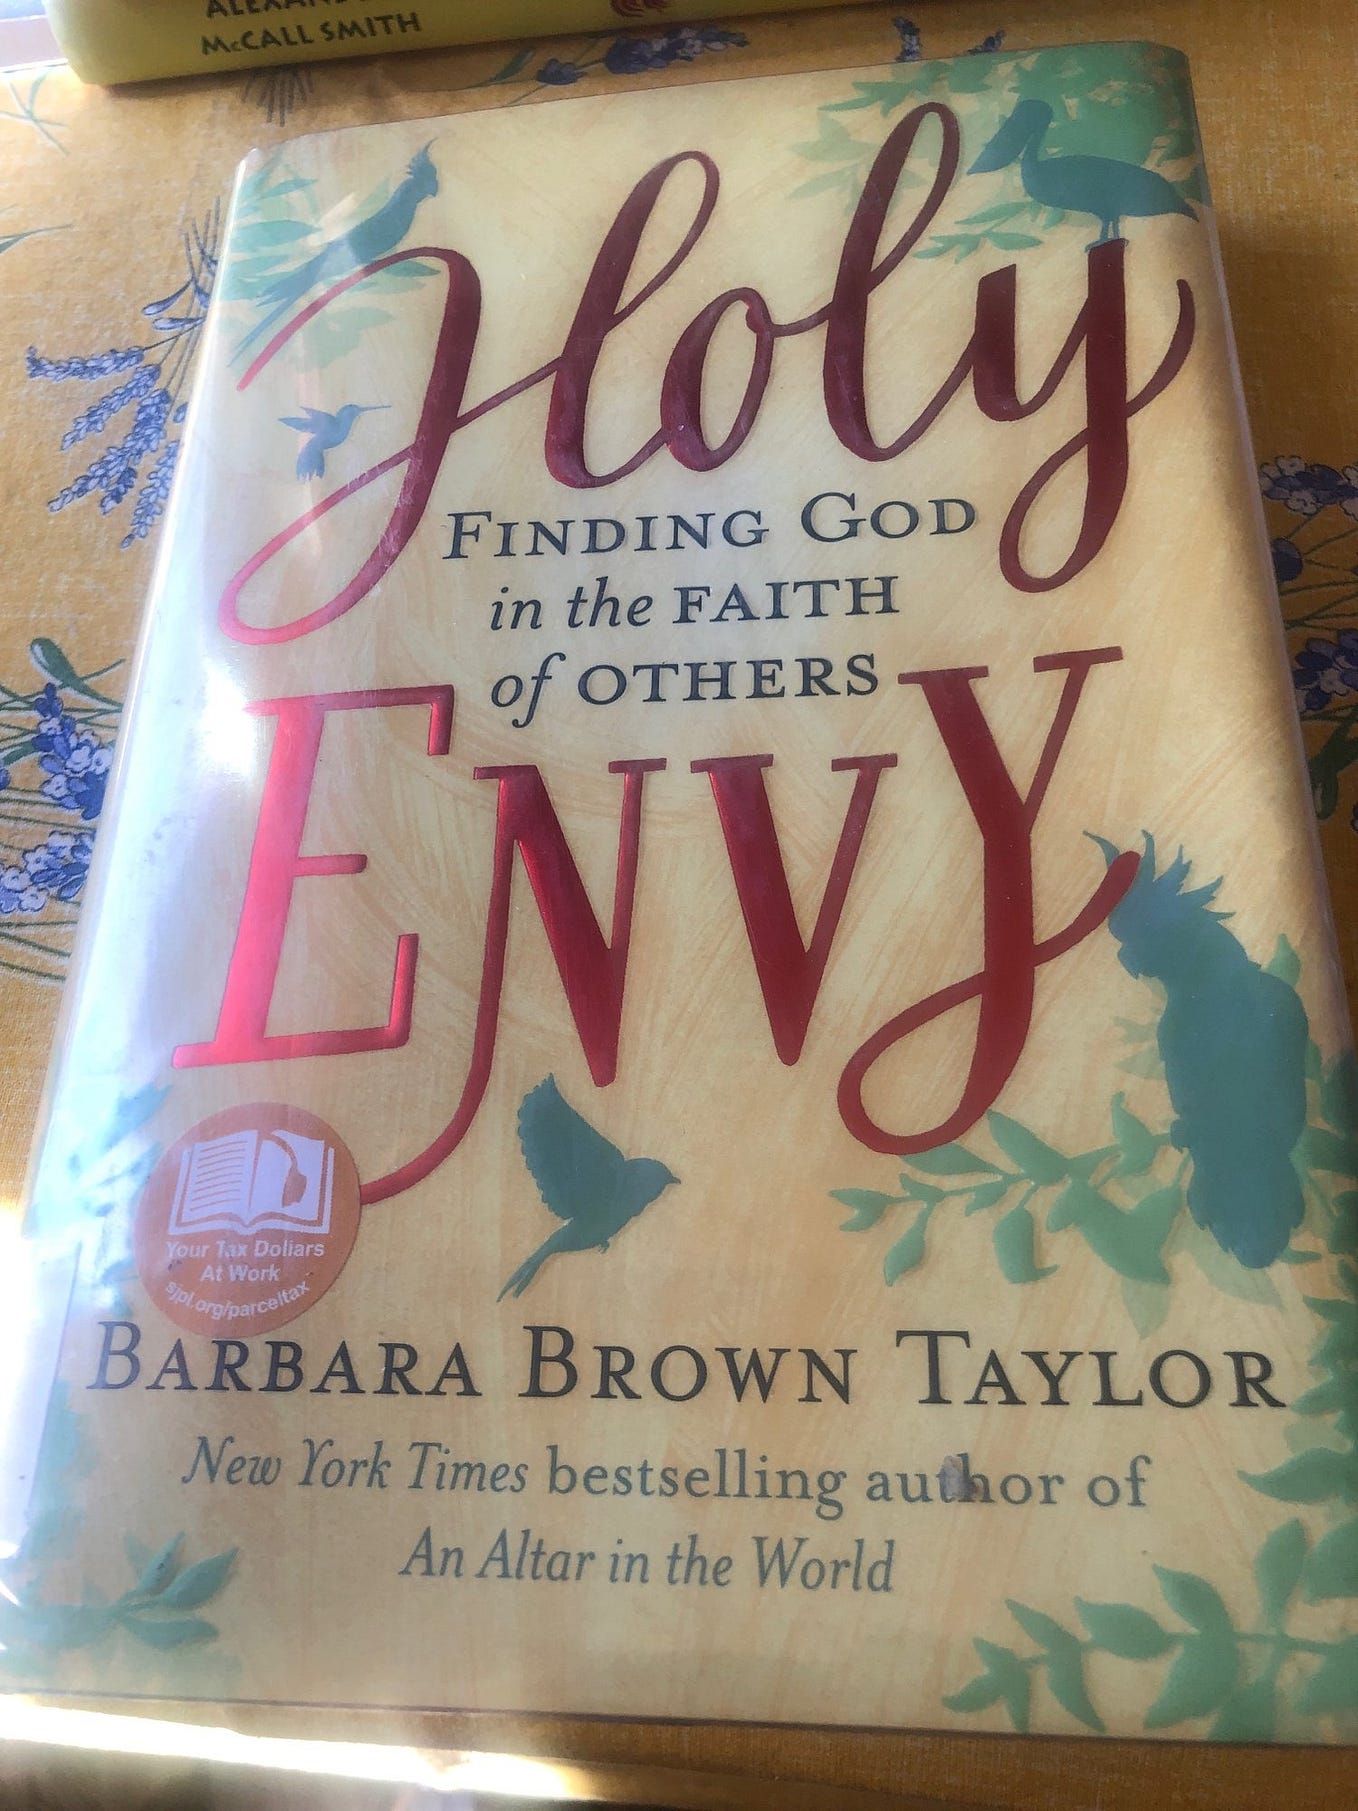 Holy Envy by Barbara Brown Taylor